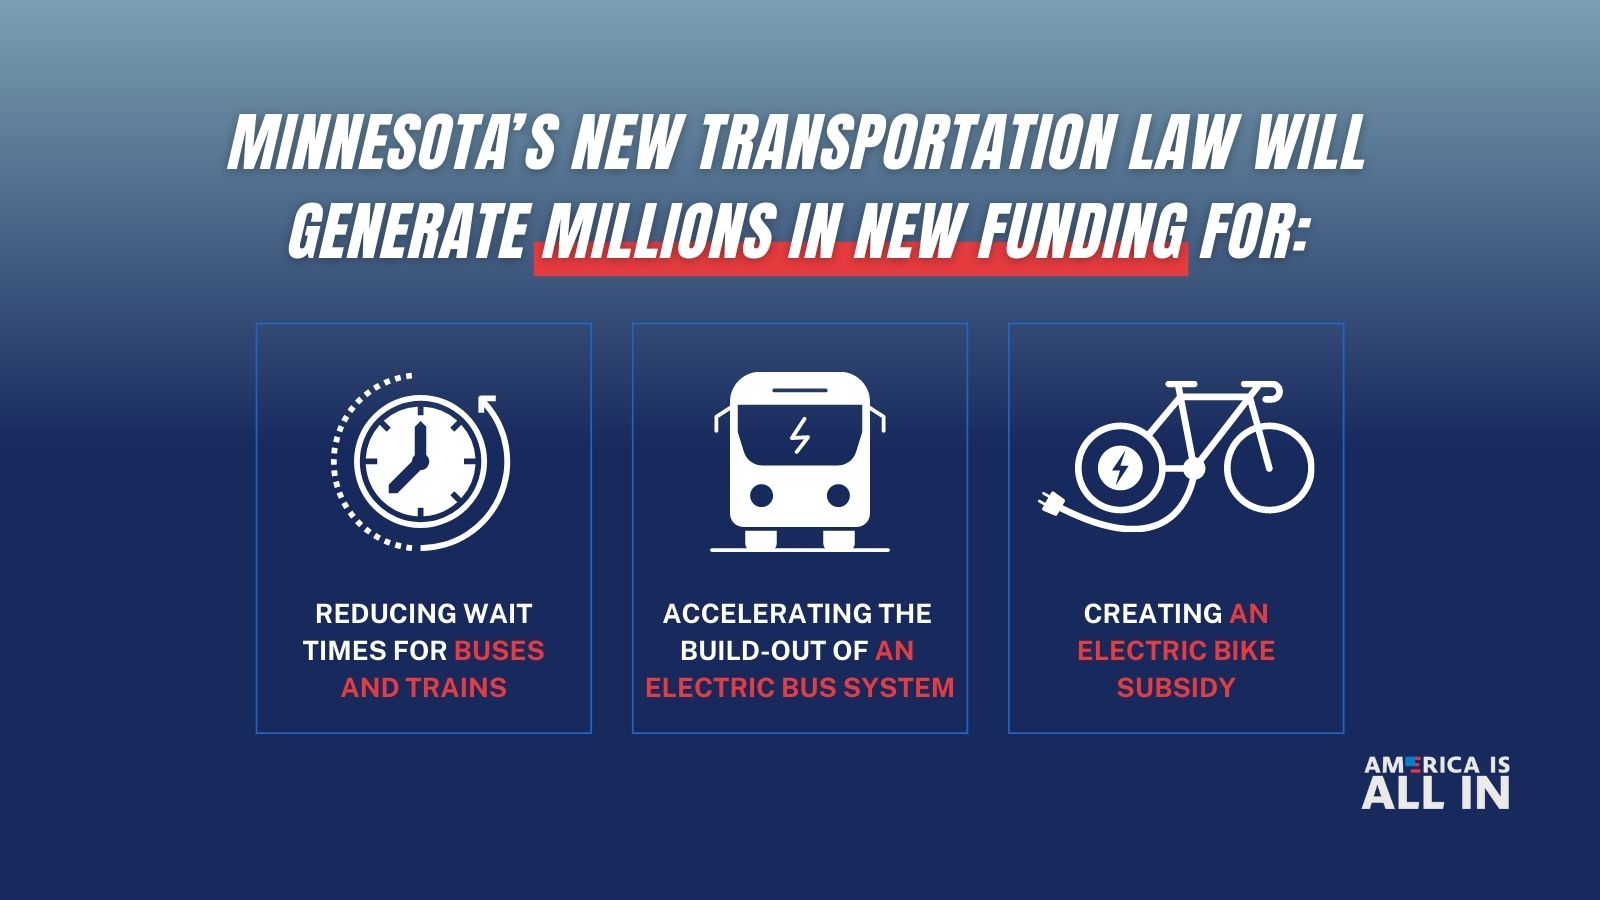 Graphic that says "Minnesota's new transportation law will generate millions in new funding for: reducing wait times for buses and trains, accelerating the buil-out of an electric bus system, creating an electric bike subsidy"